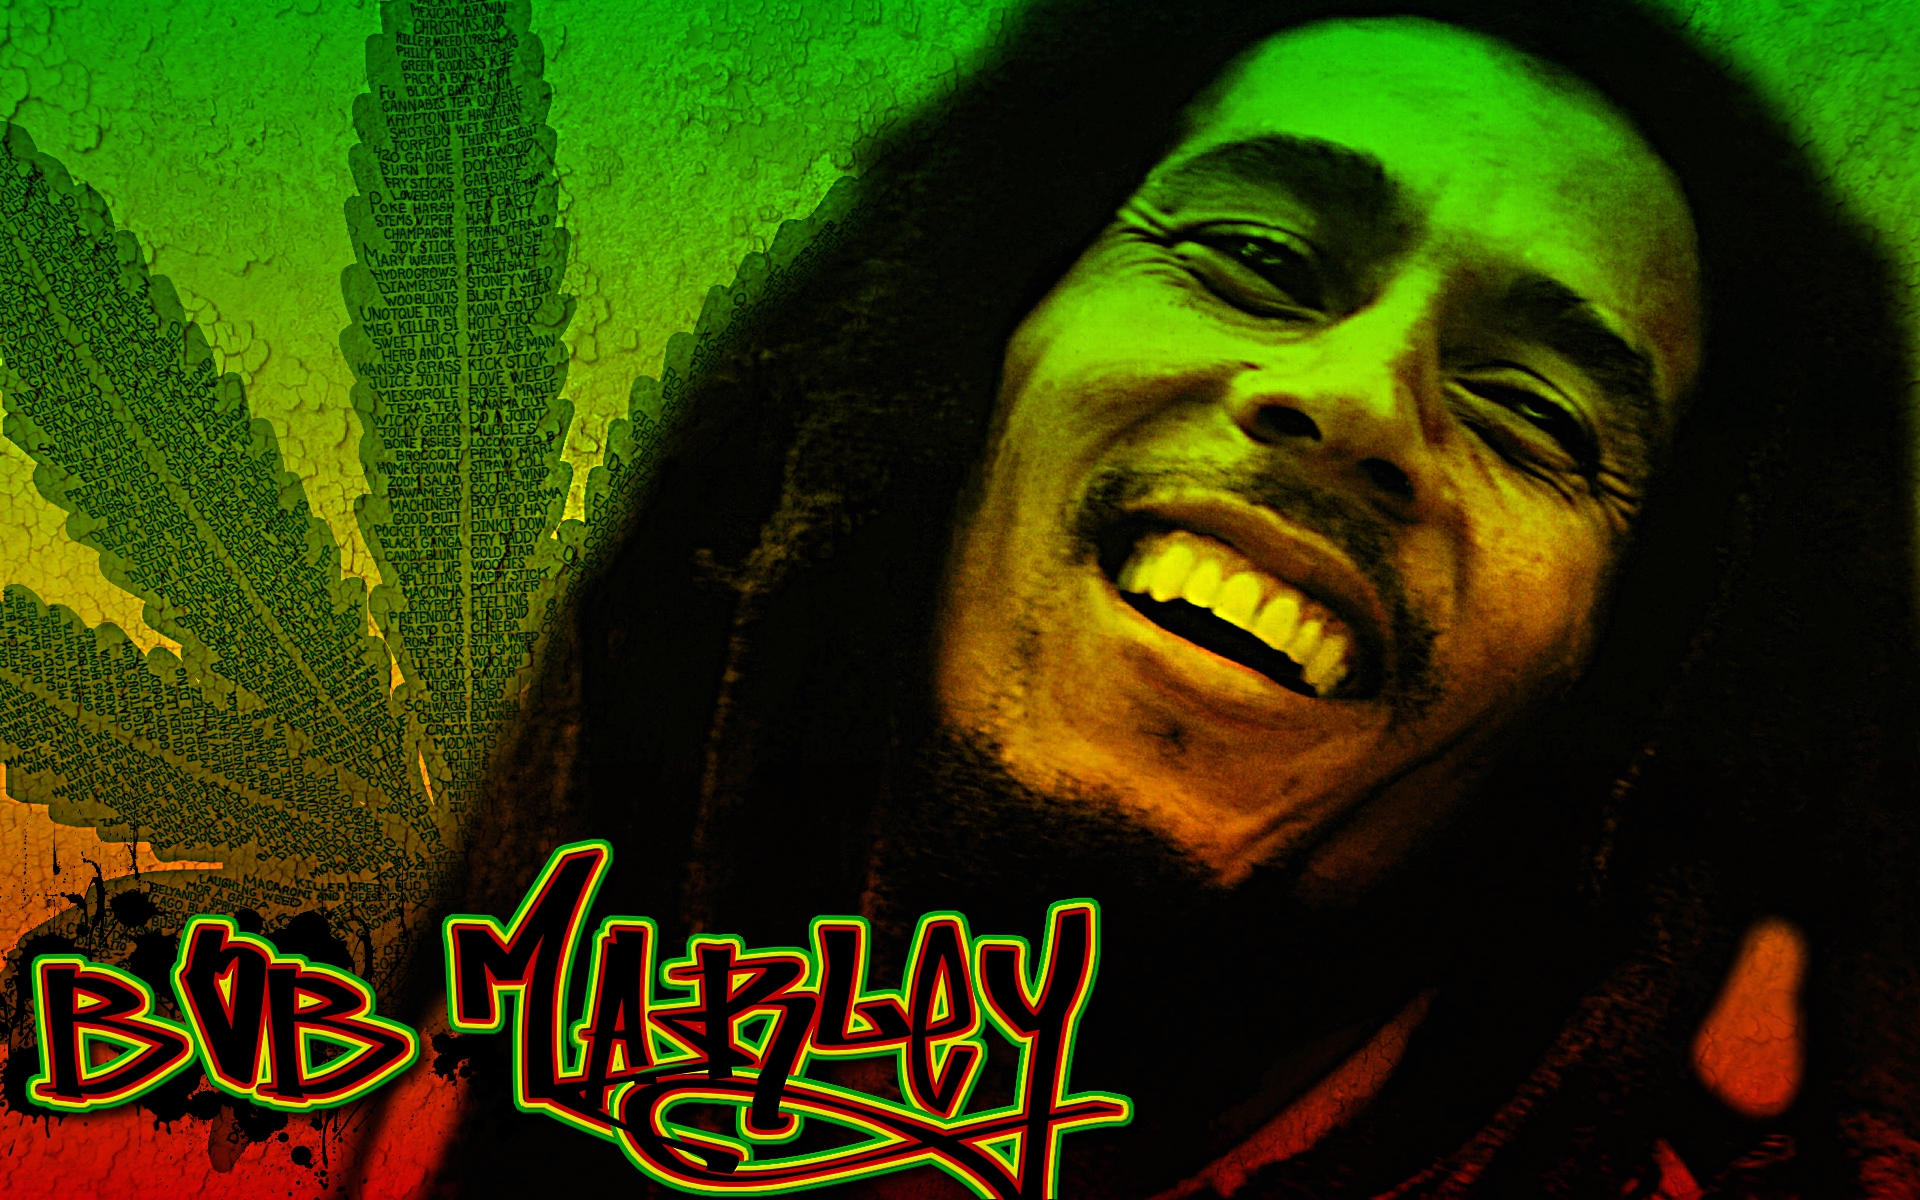 Pictures Of True Legend Bob Marley – The WoW Style1920 x 1200